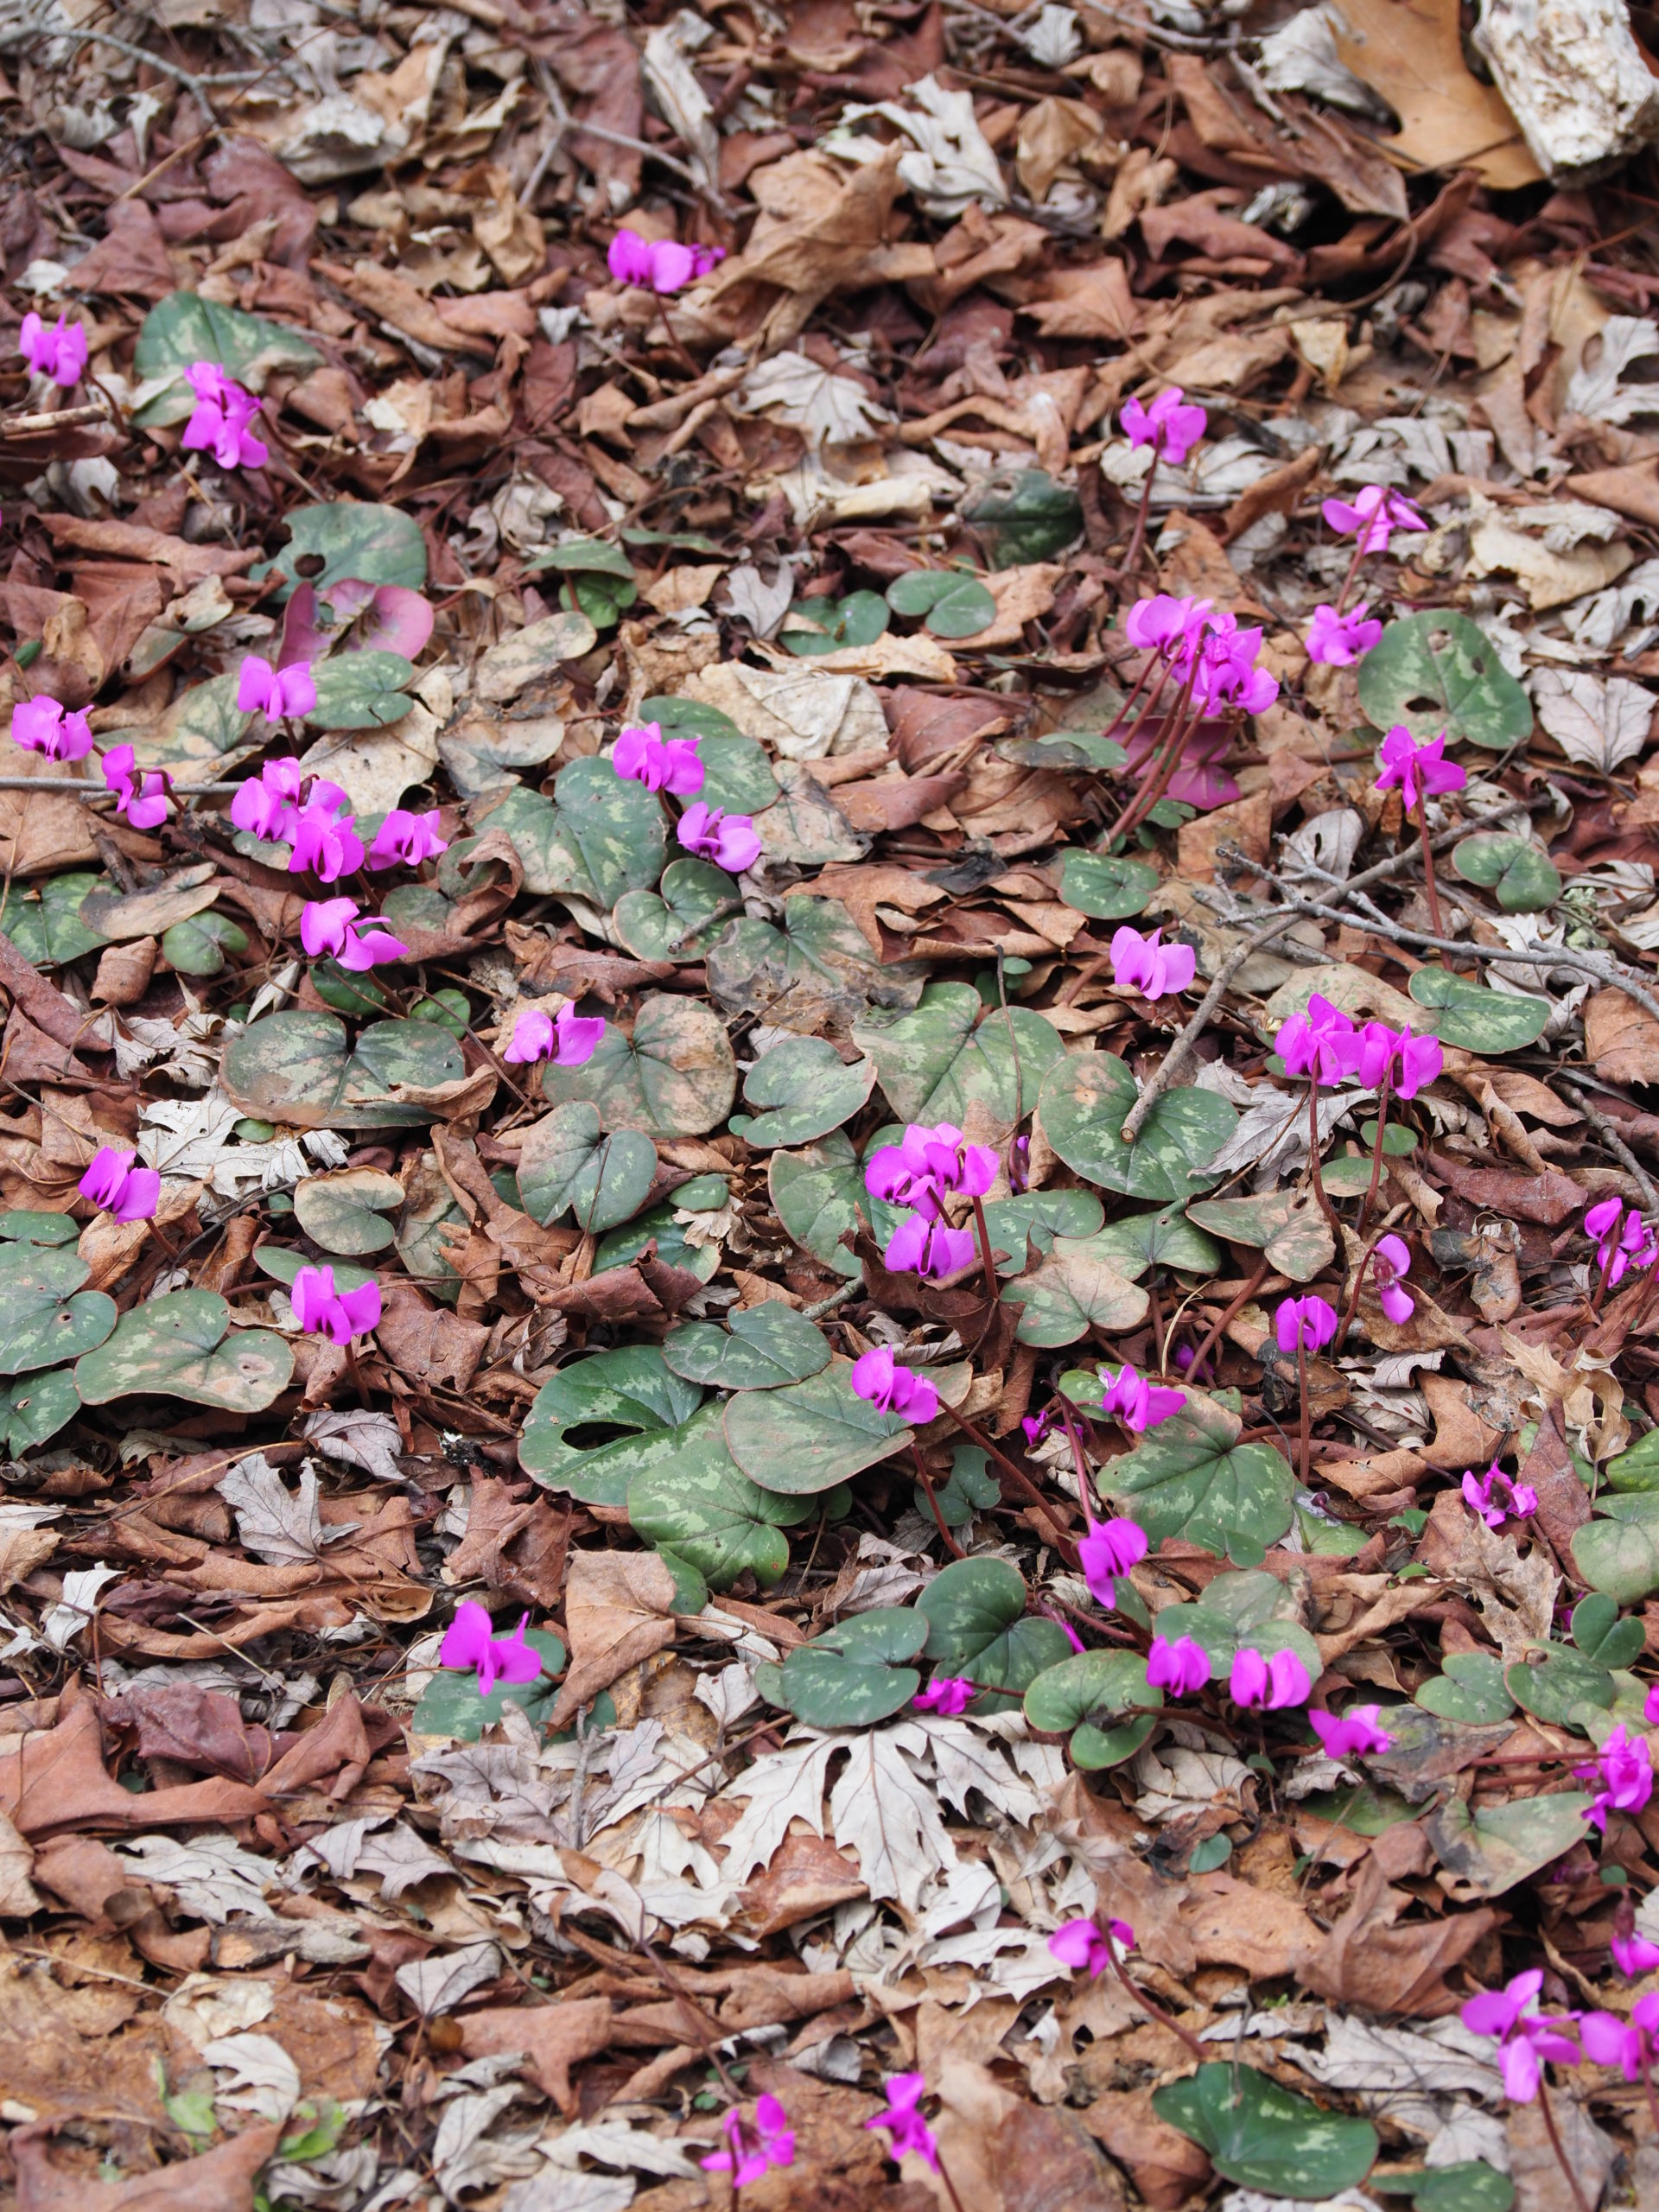 These hardy Cyclamen coum have colonized at the base of a 100-year-old maple tree. Blooming from March through April, they are one of the first spring flowers to appear. When planted en masse, they make quite a statement of spring.  ANDREW MESSINGER